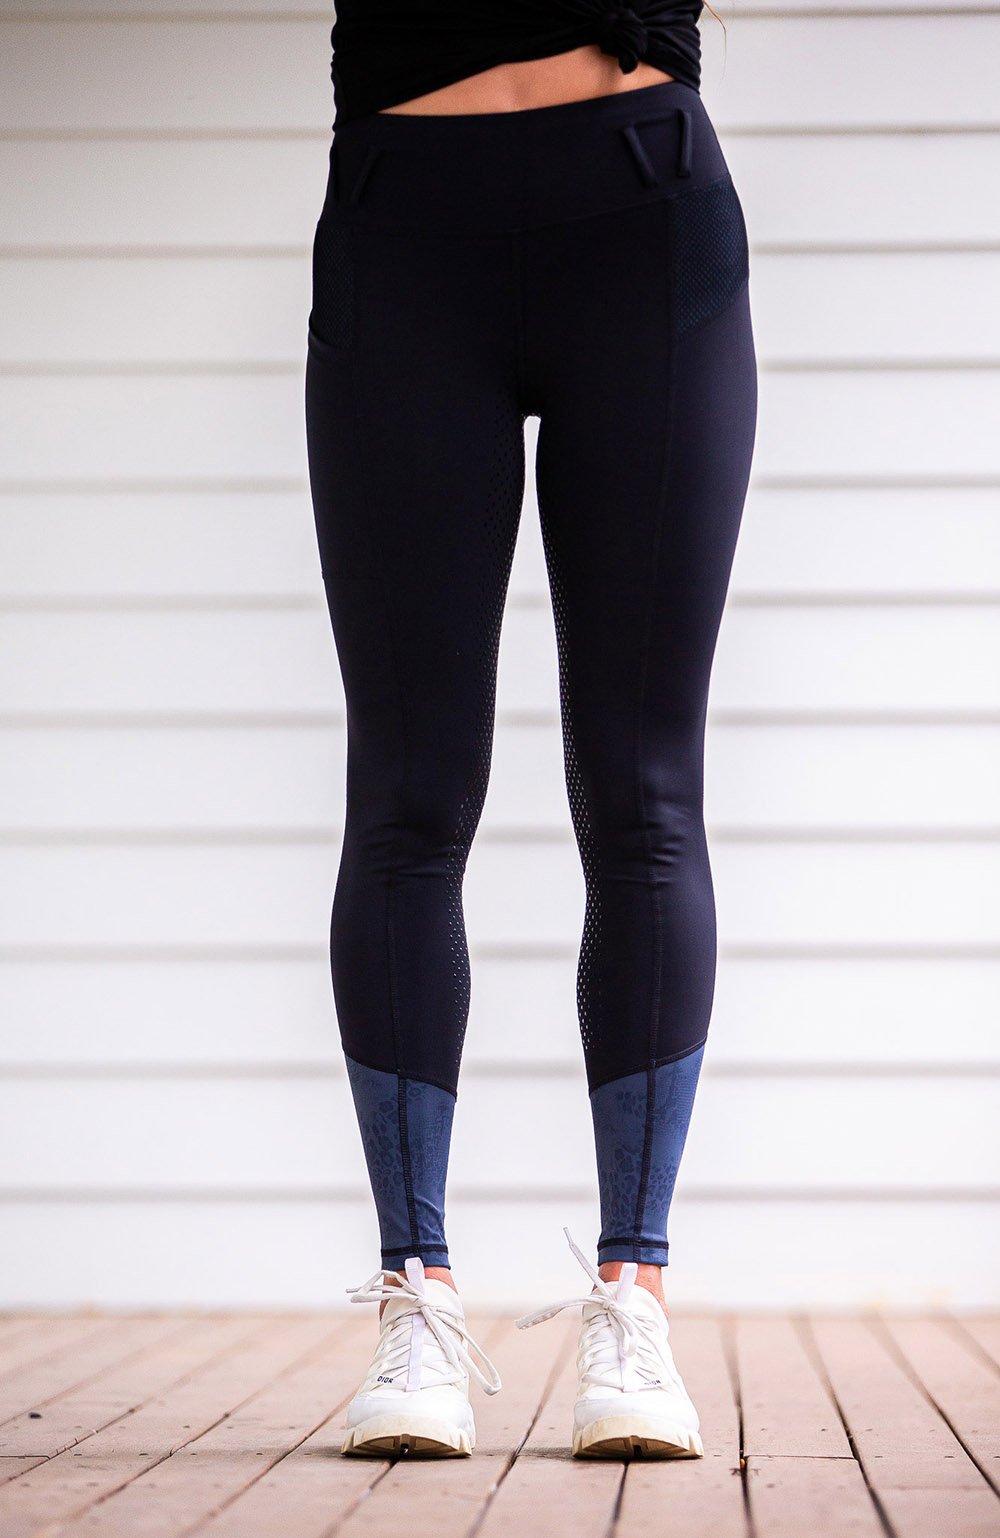 BARE Performance Riding Tights - Old Navy